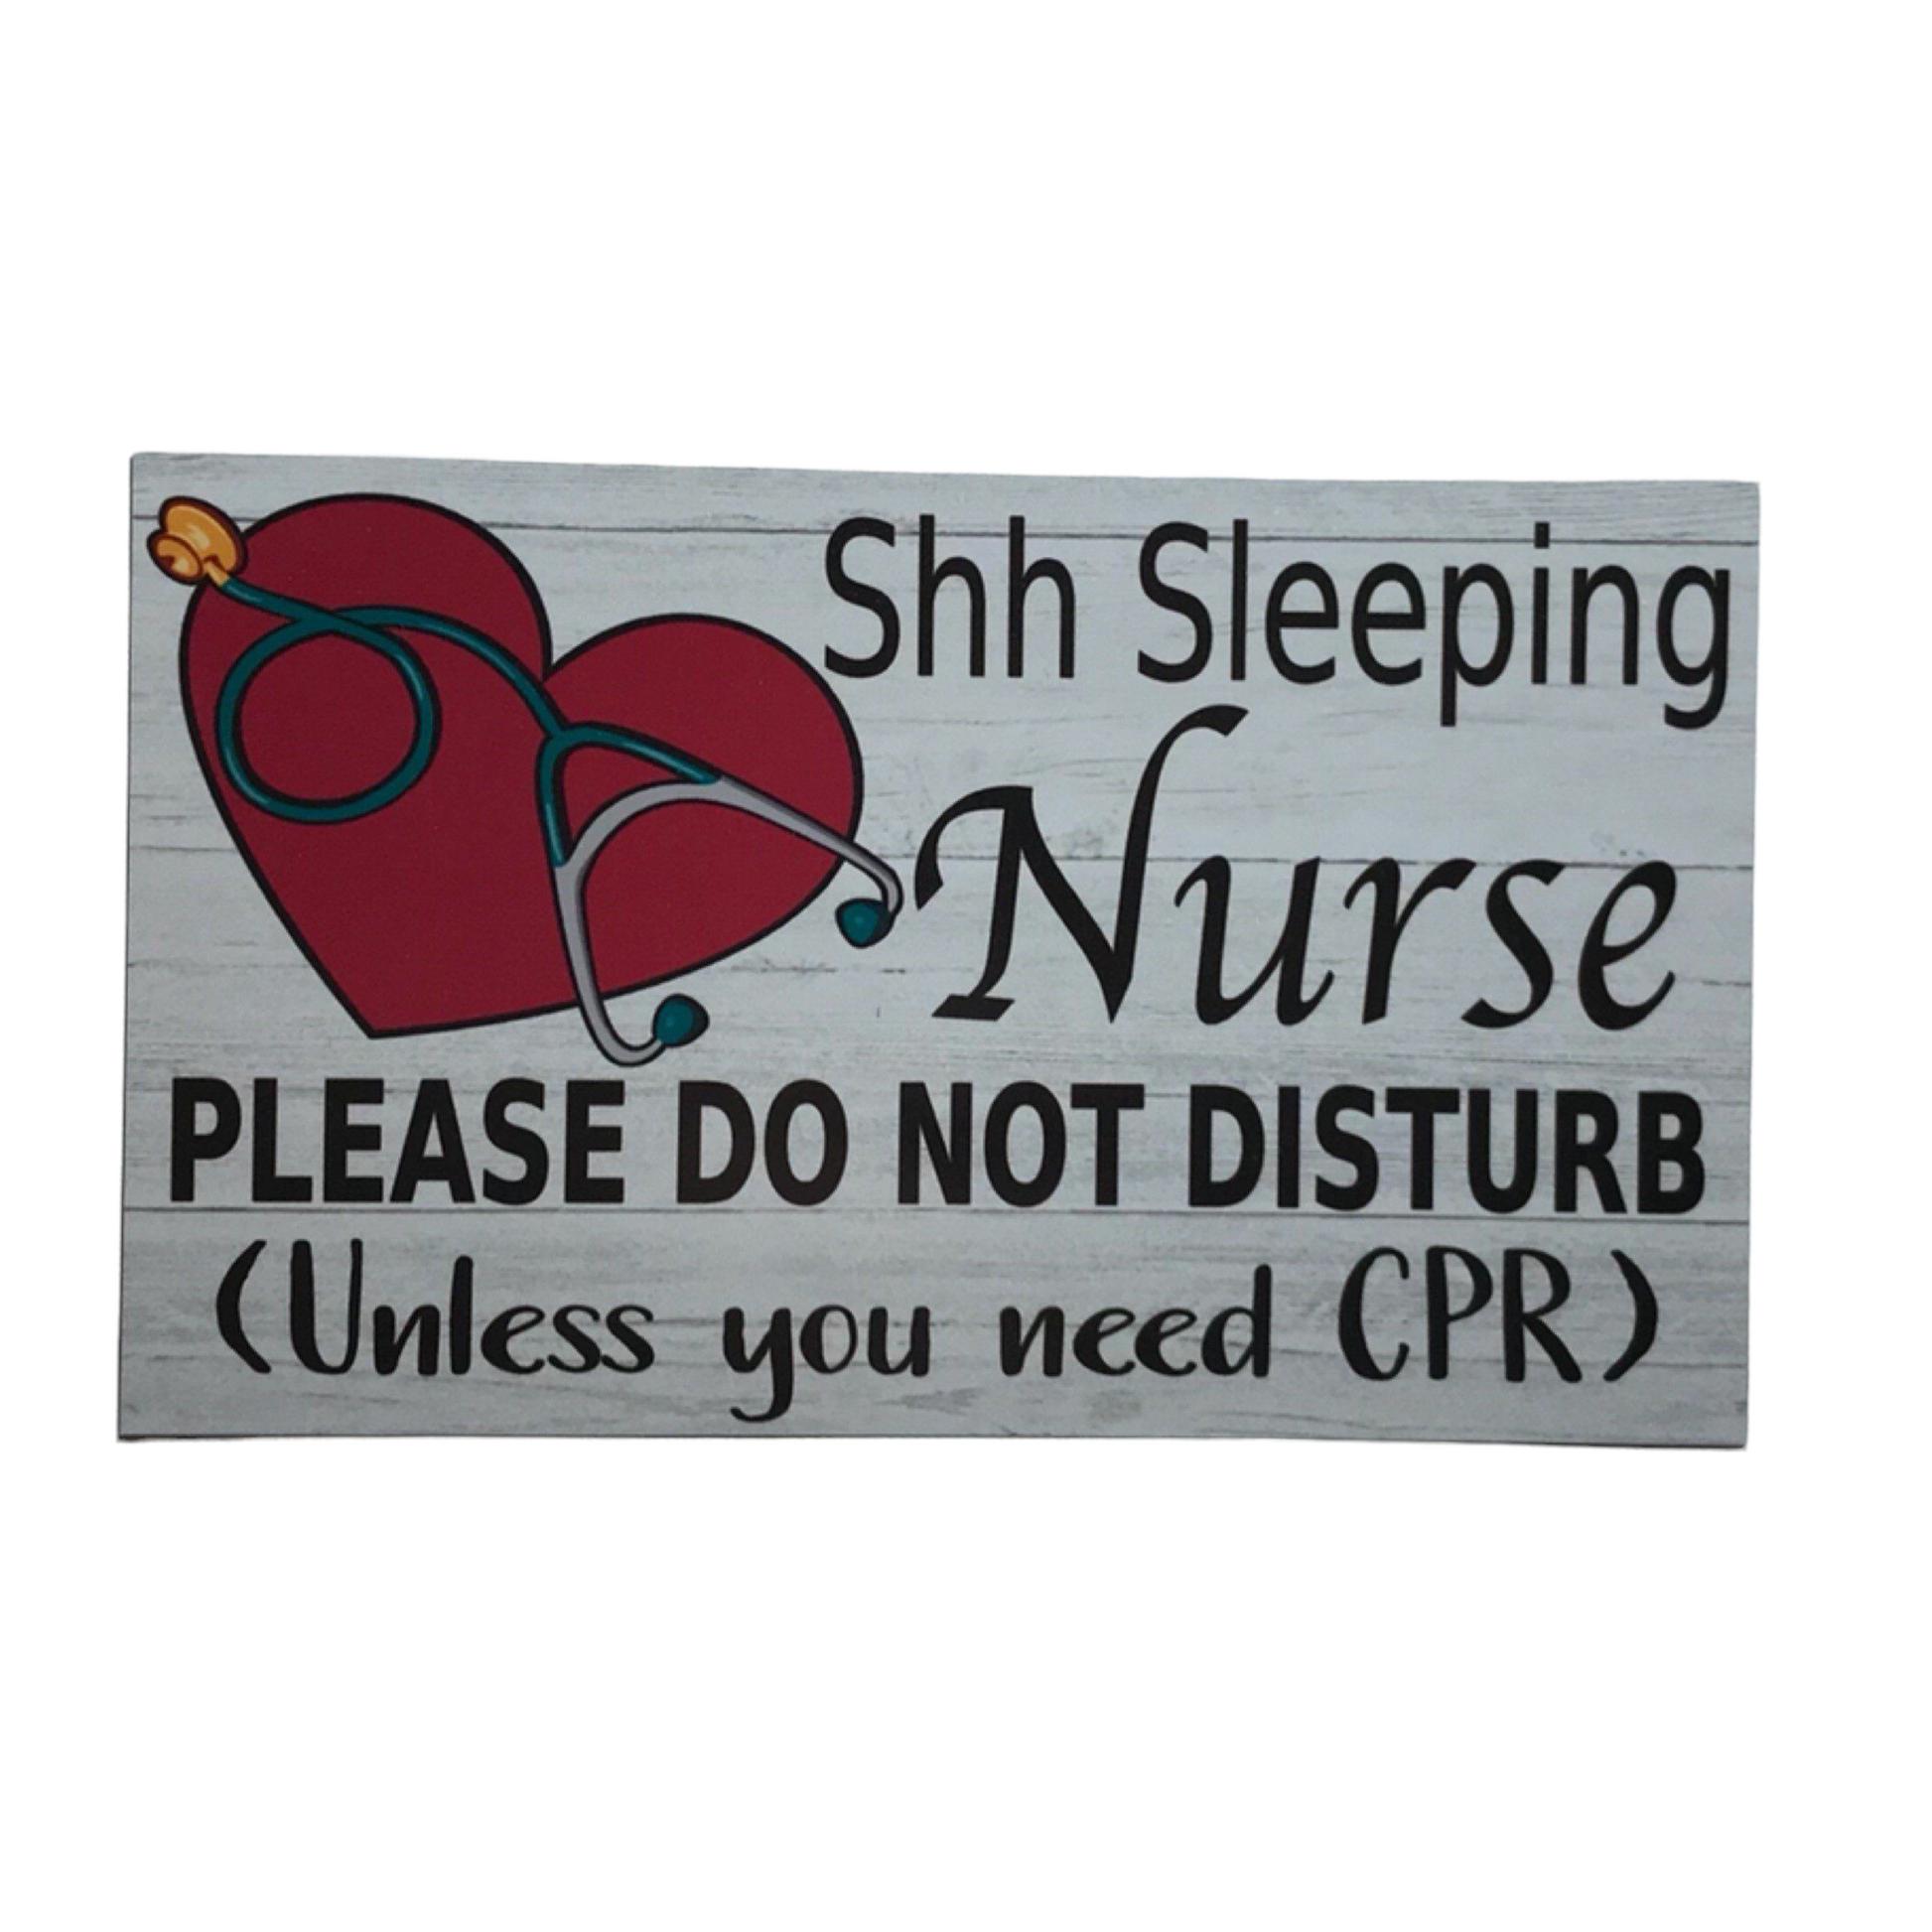 Nurse Sleeping Please Do Not Disturb Unless You Need CPR Sign - The Renmy Store Homewares & Gifts 